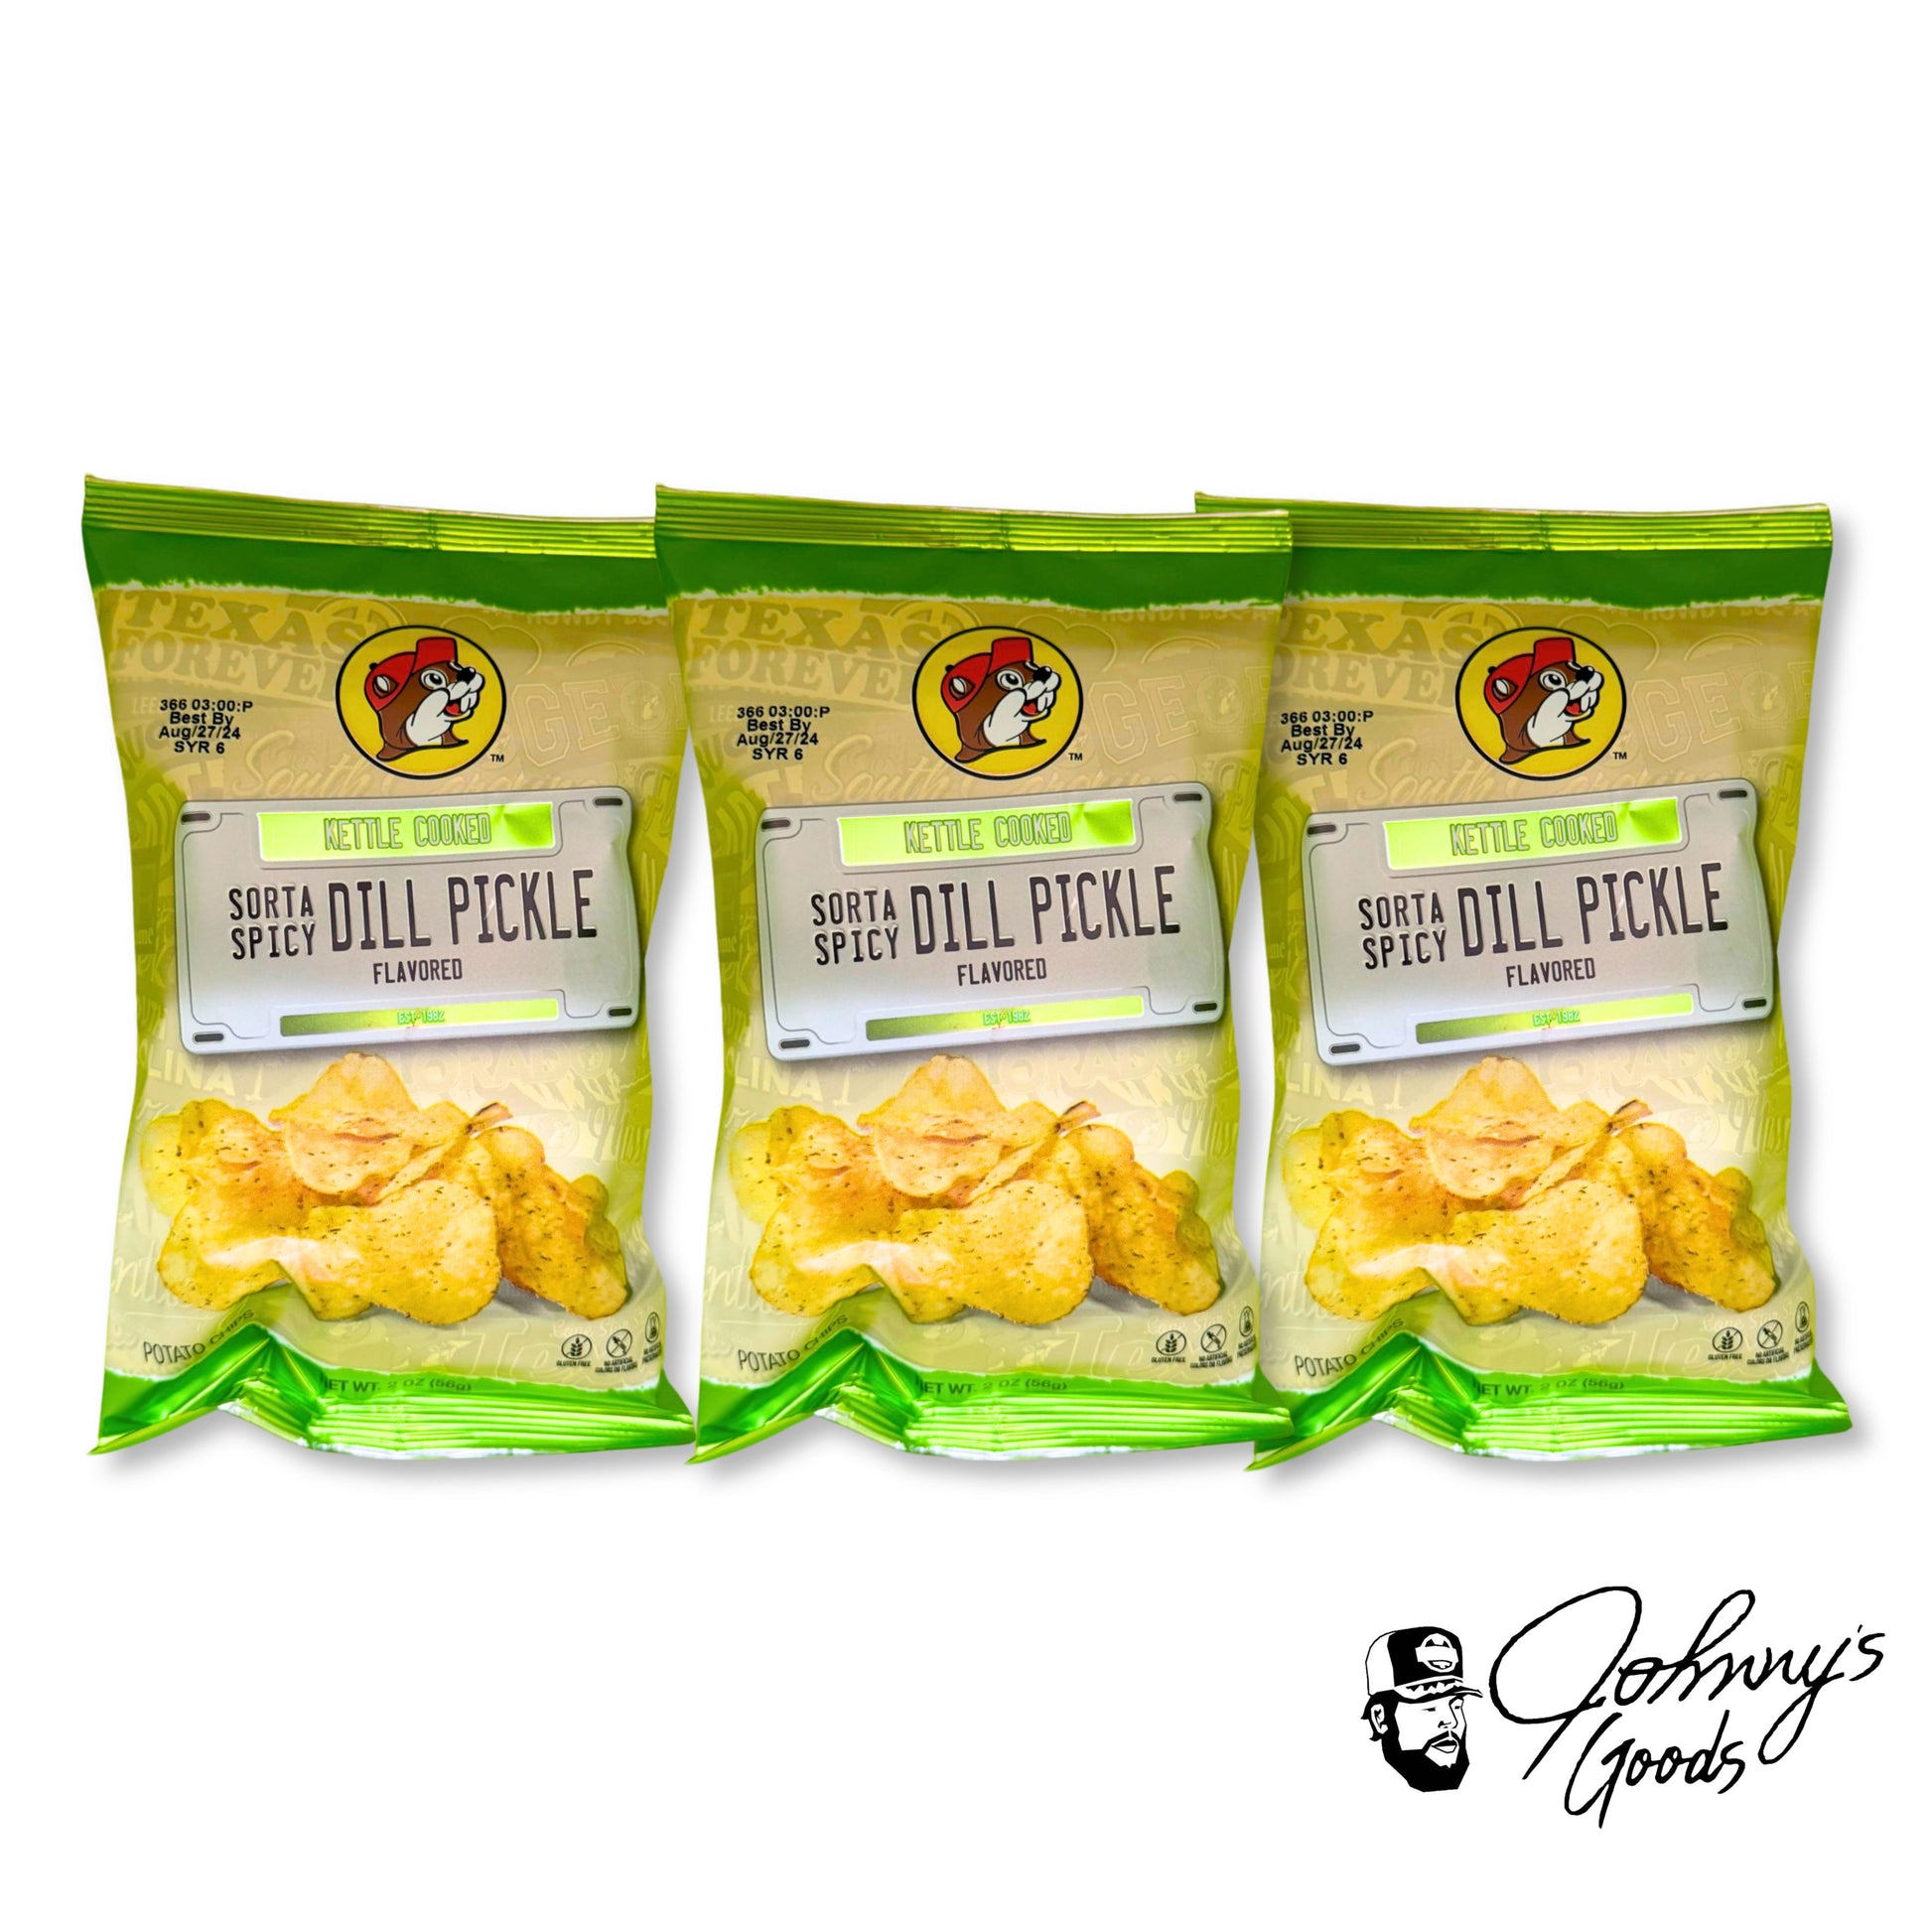 Buc-ee's Kettle Cooked Potato Chips Flavored buc ees buc ee's bucees buccees buc-ees